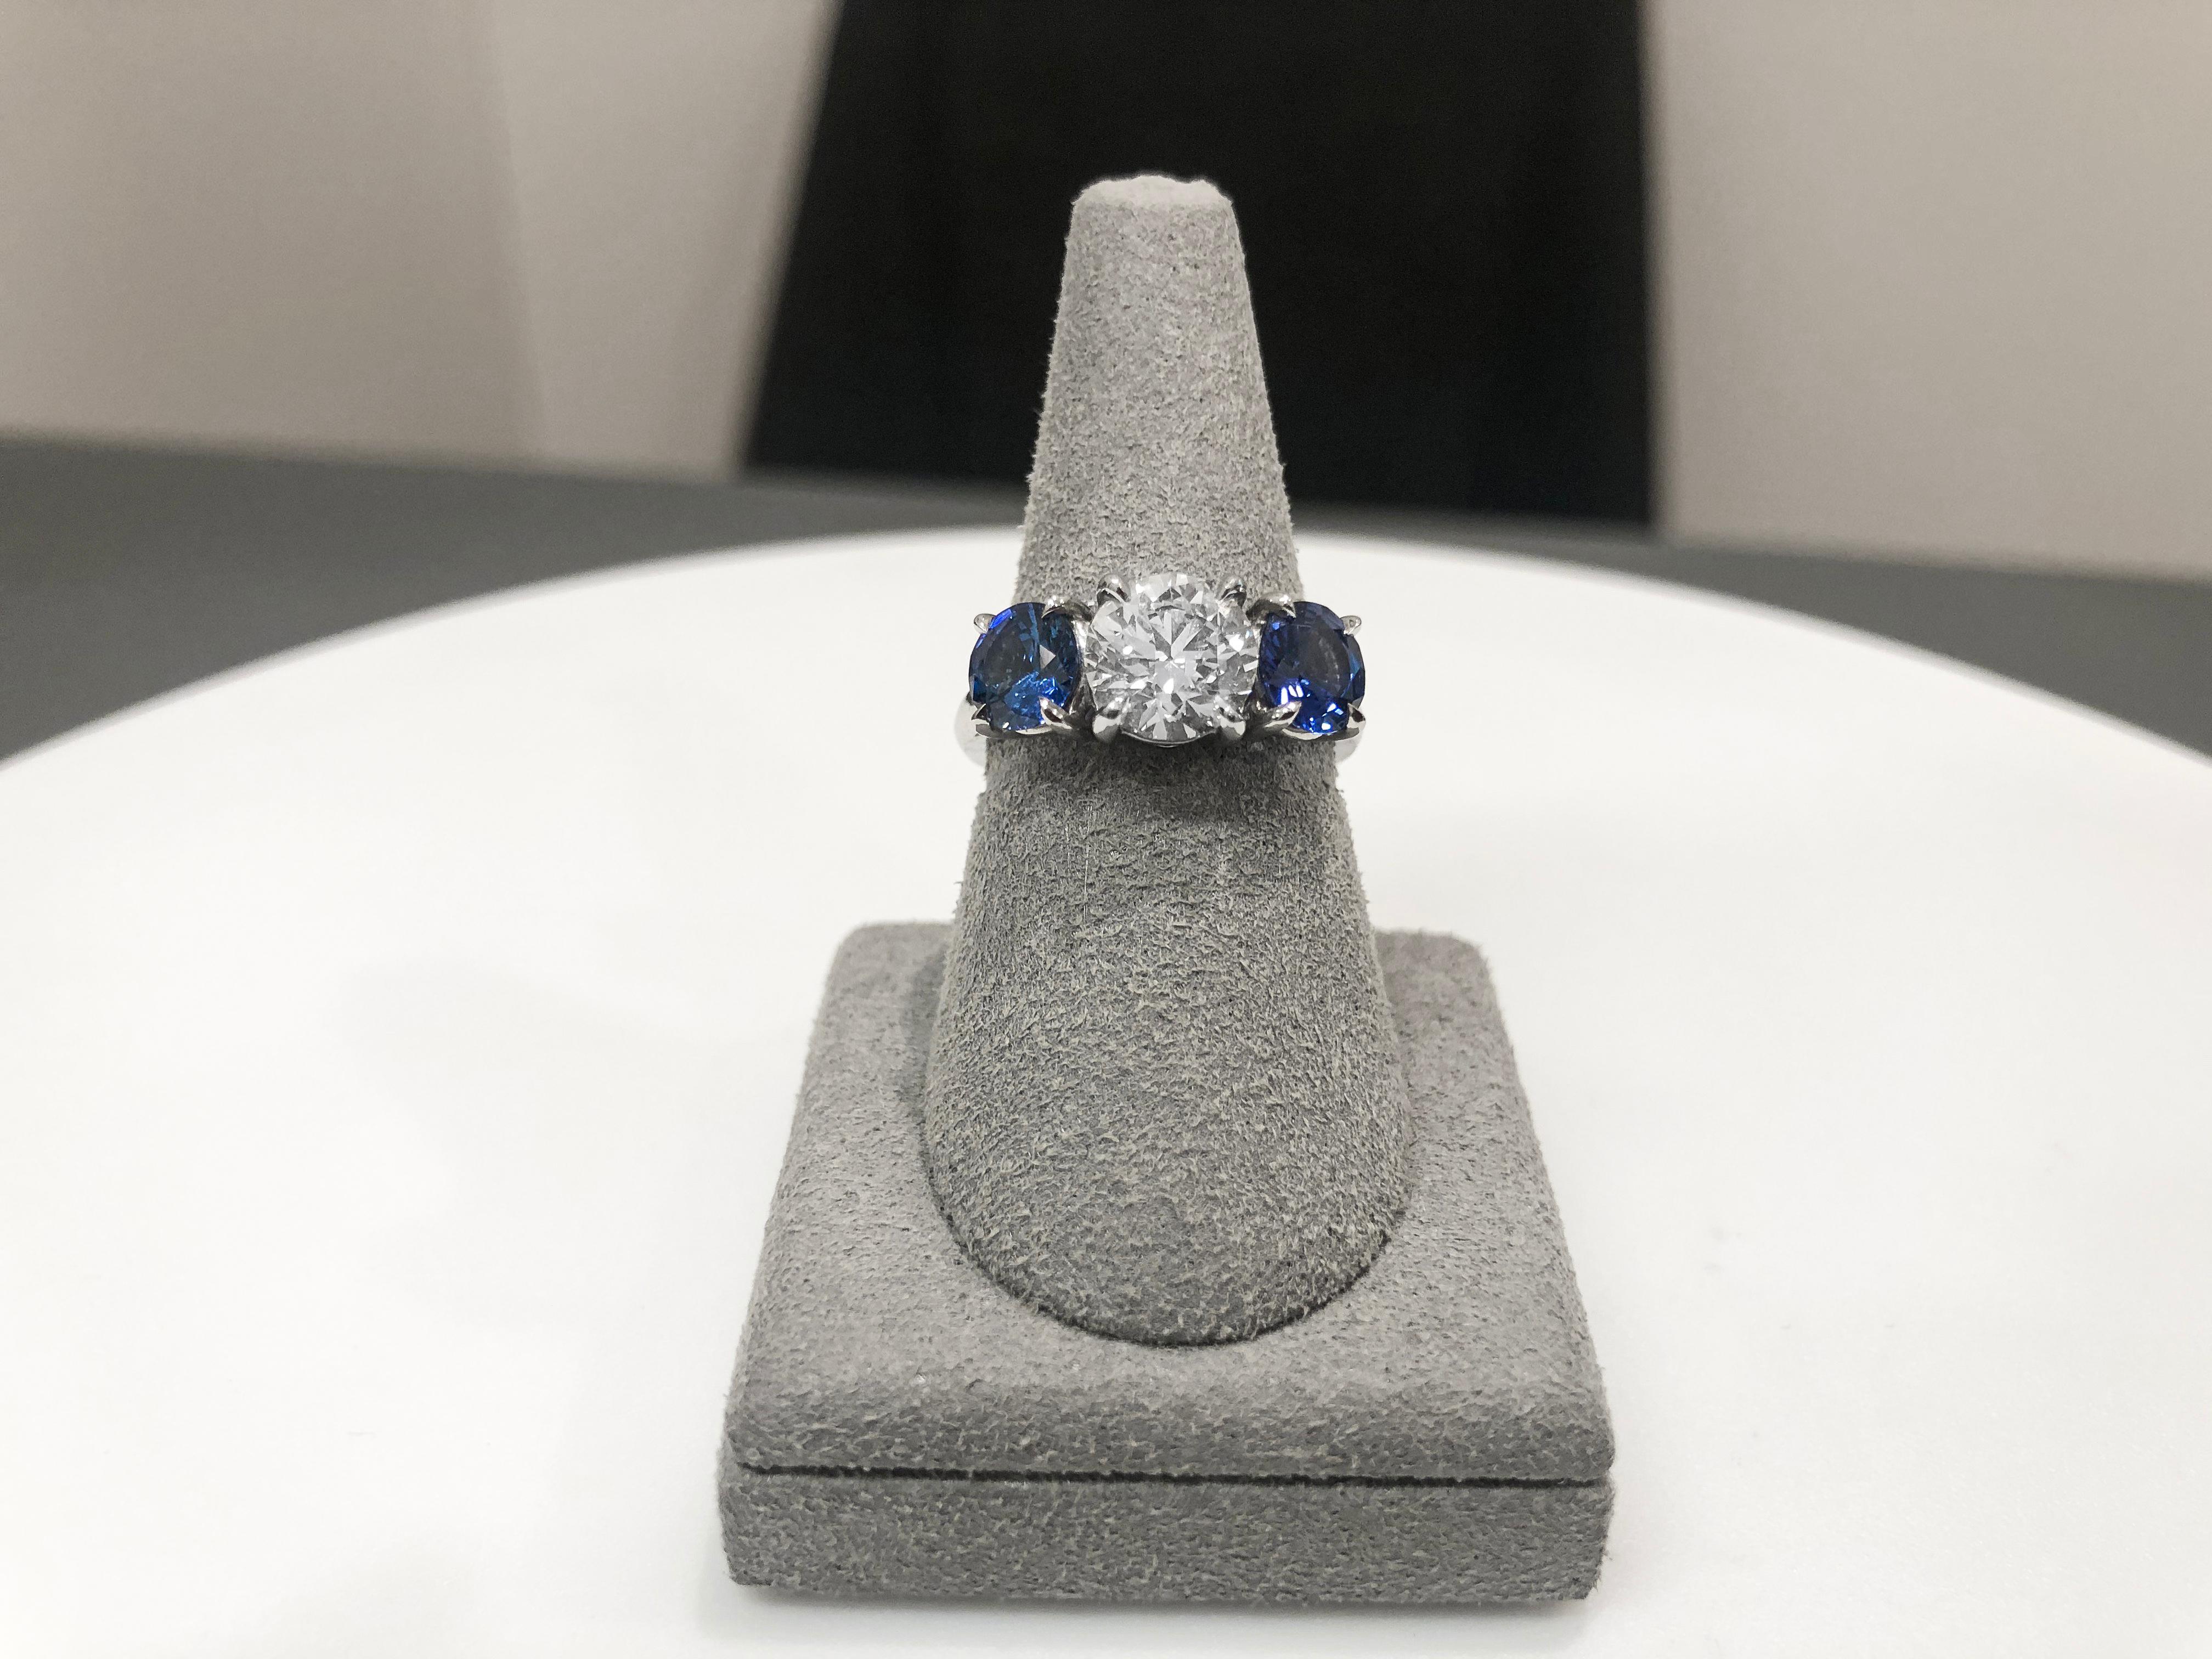 A sparkling 1.50 carat round diamond takes center stage in this sapphire and diamond engagement ring. Accenting the center stone are 2 color-rich rubies set in 4 prongs made in platinum. Rounded composition for a seamless and comfortable fit. Size 6